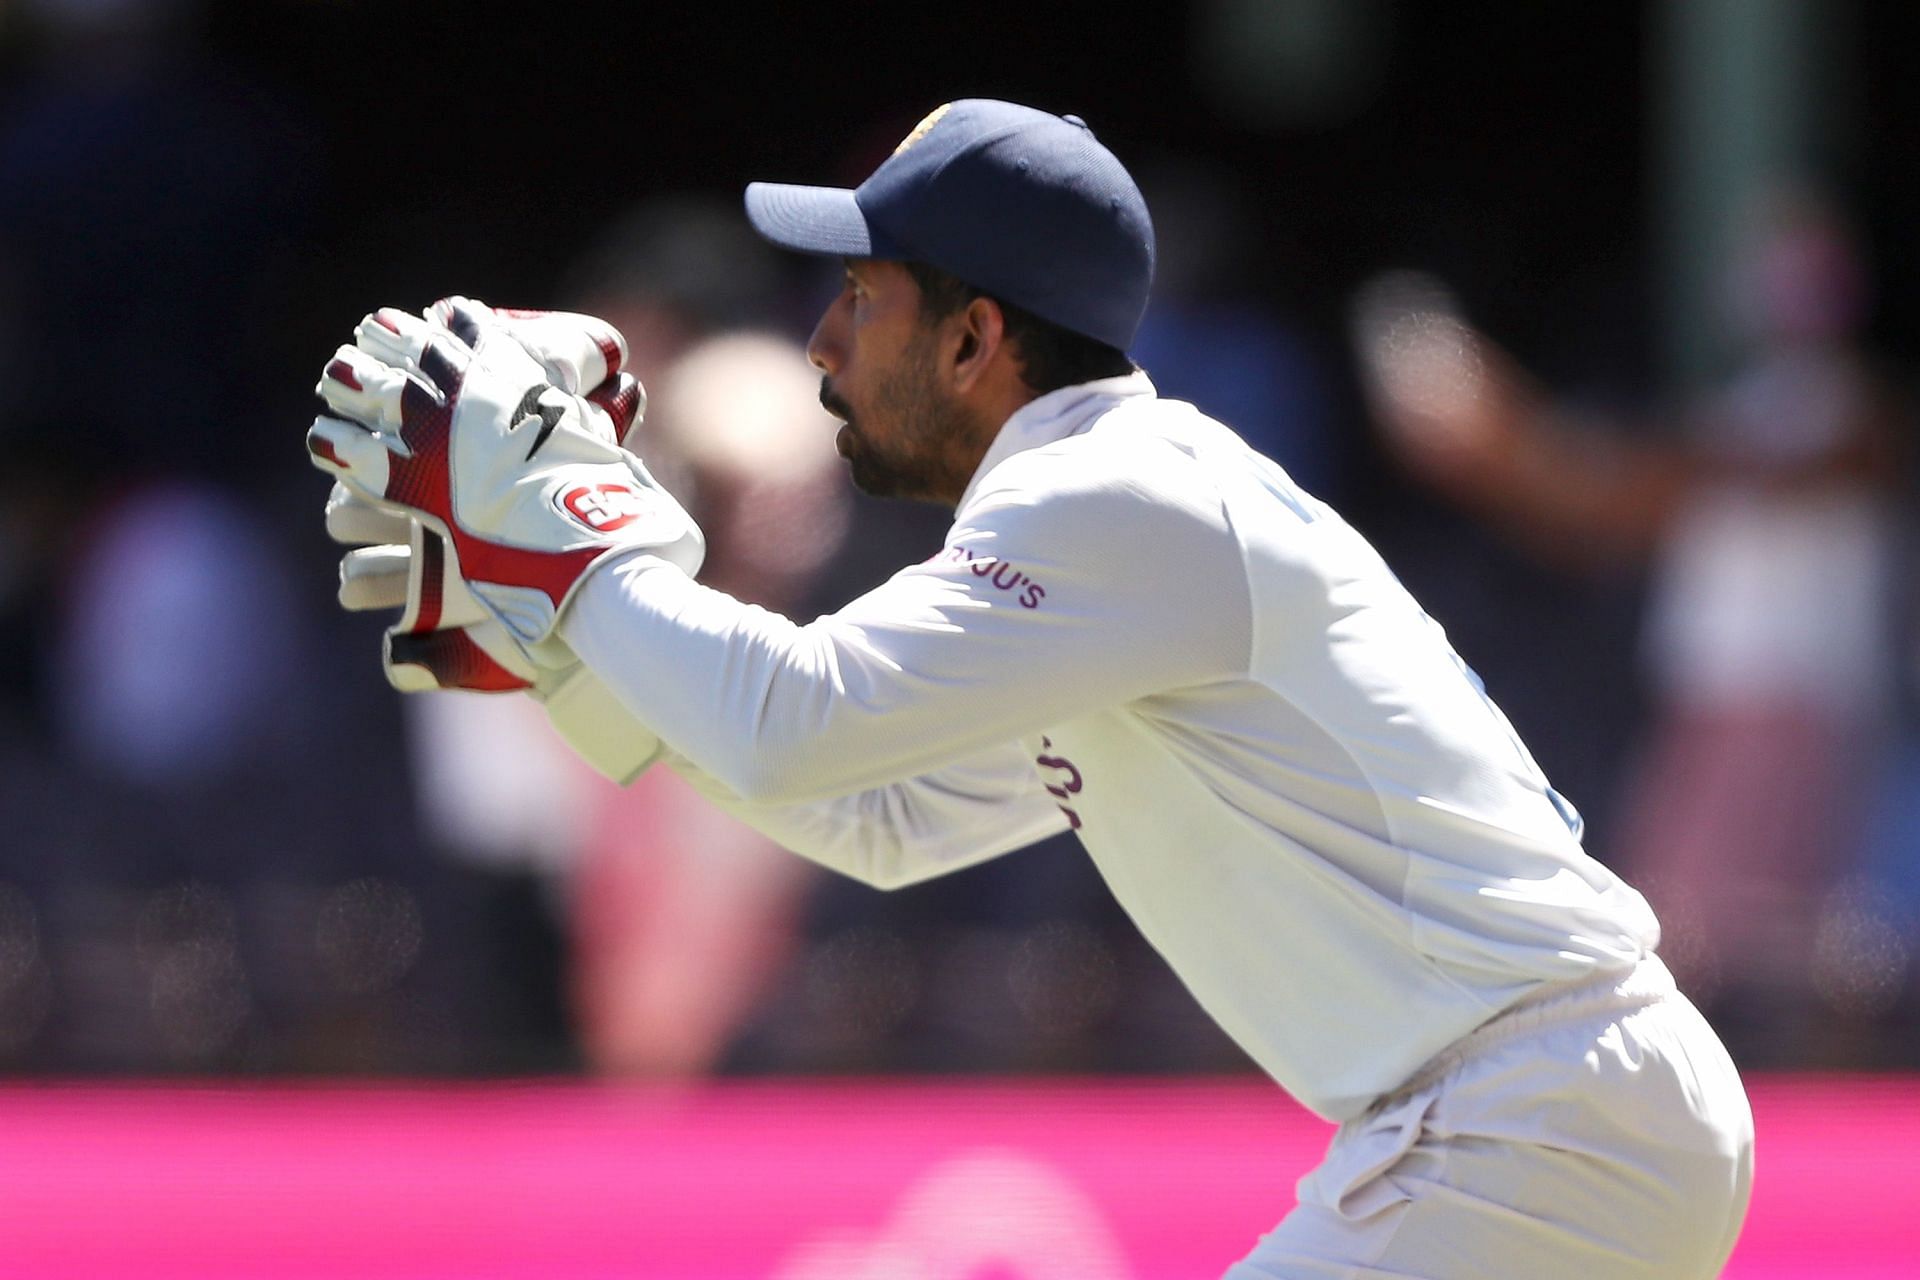 The Indian selectors have opted to look beyond Wriddhiman Saha